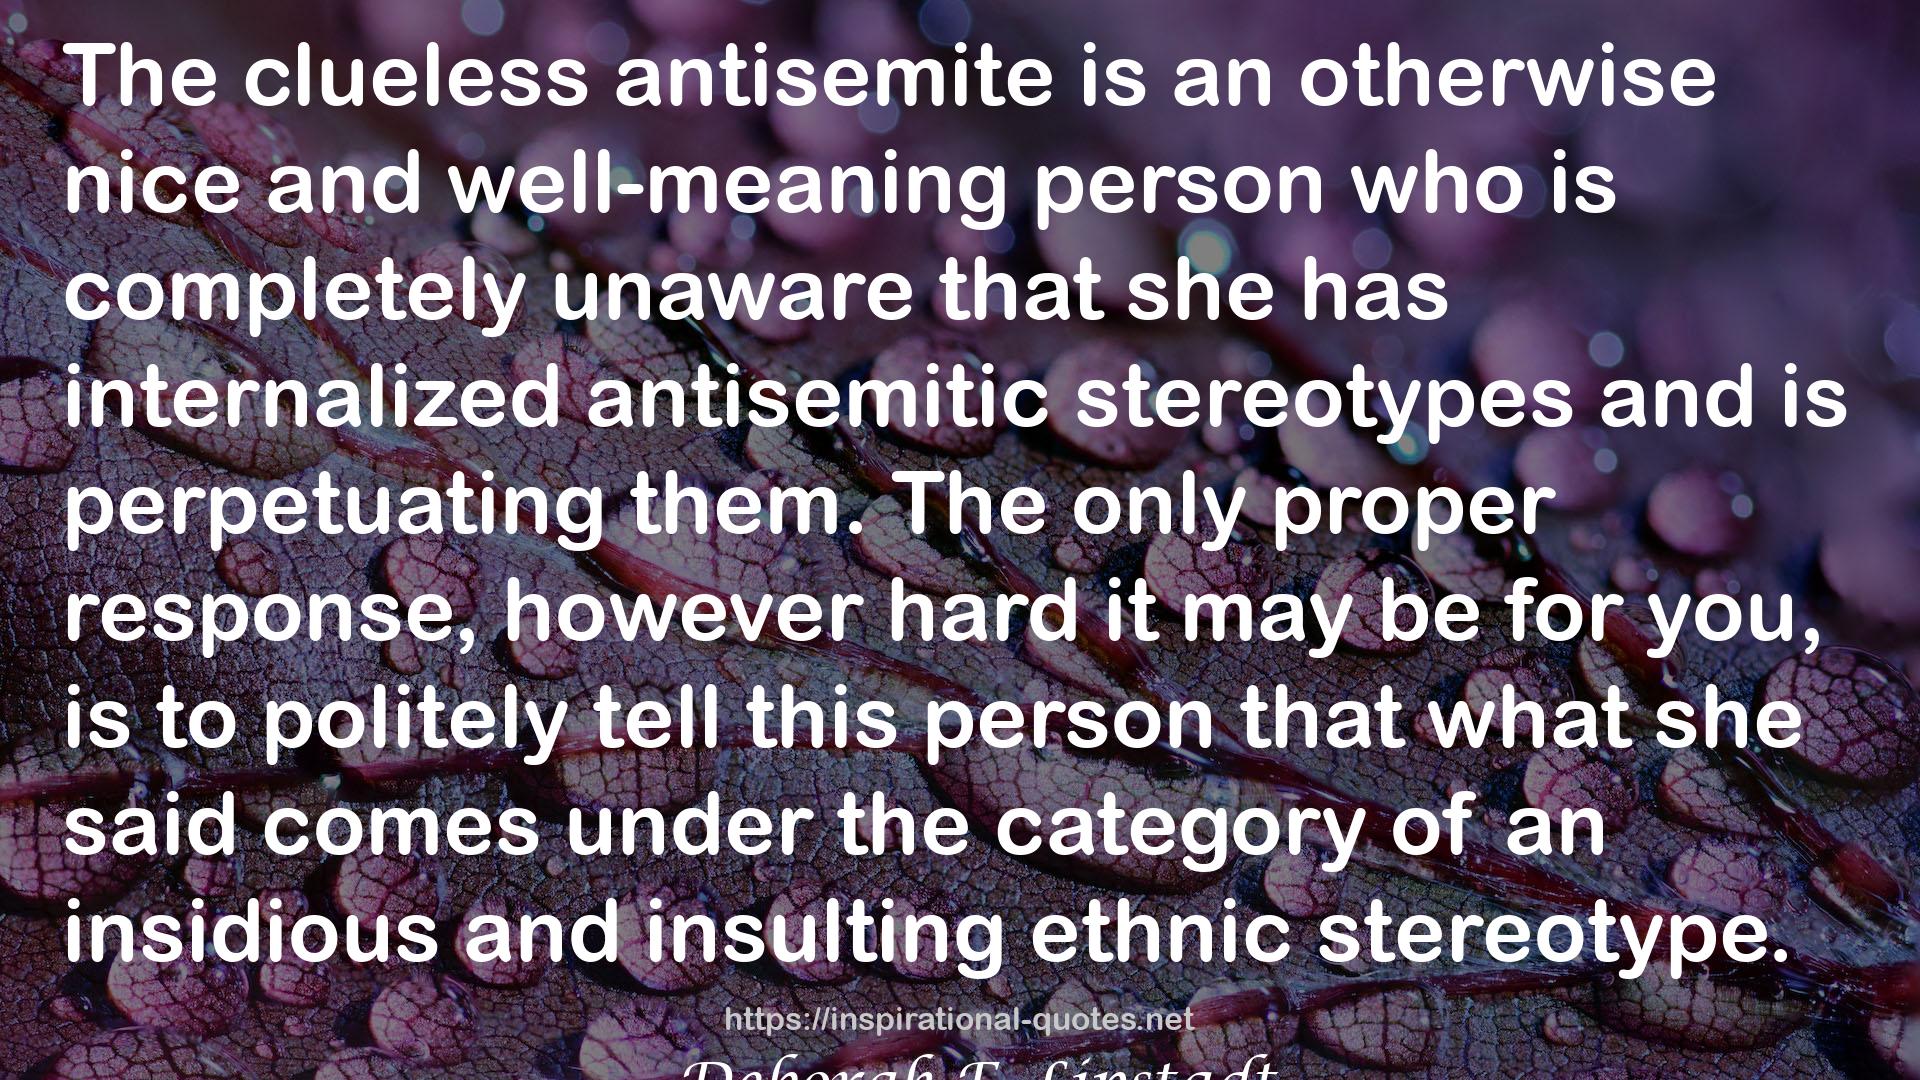 Antisemitism: Here and Now QUOTES